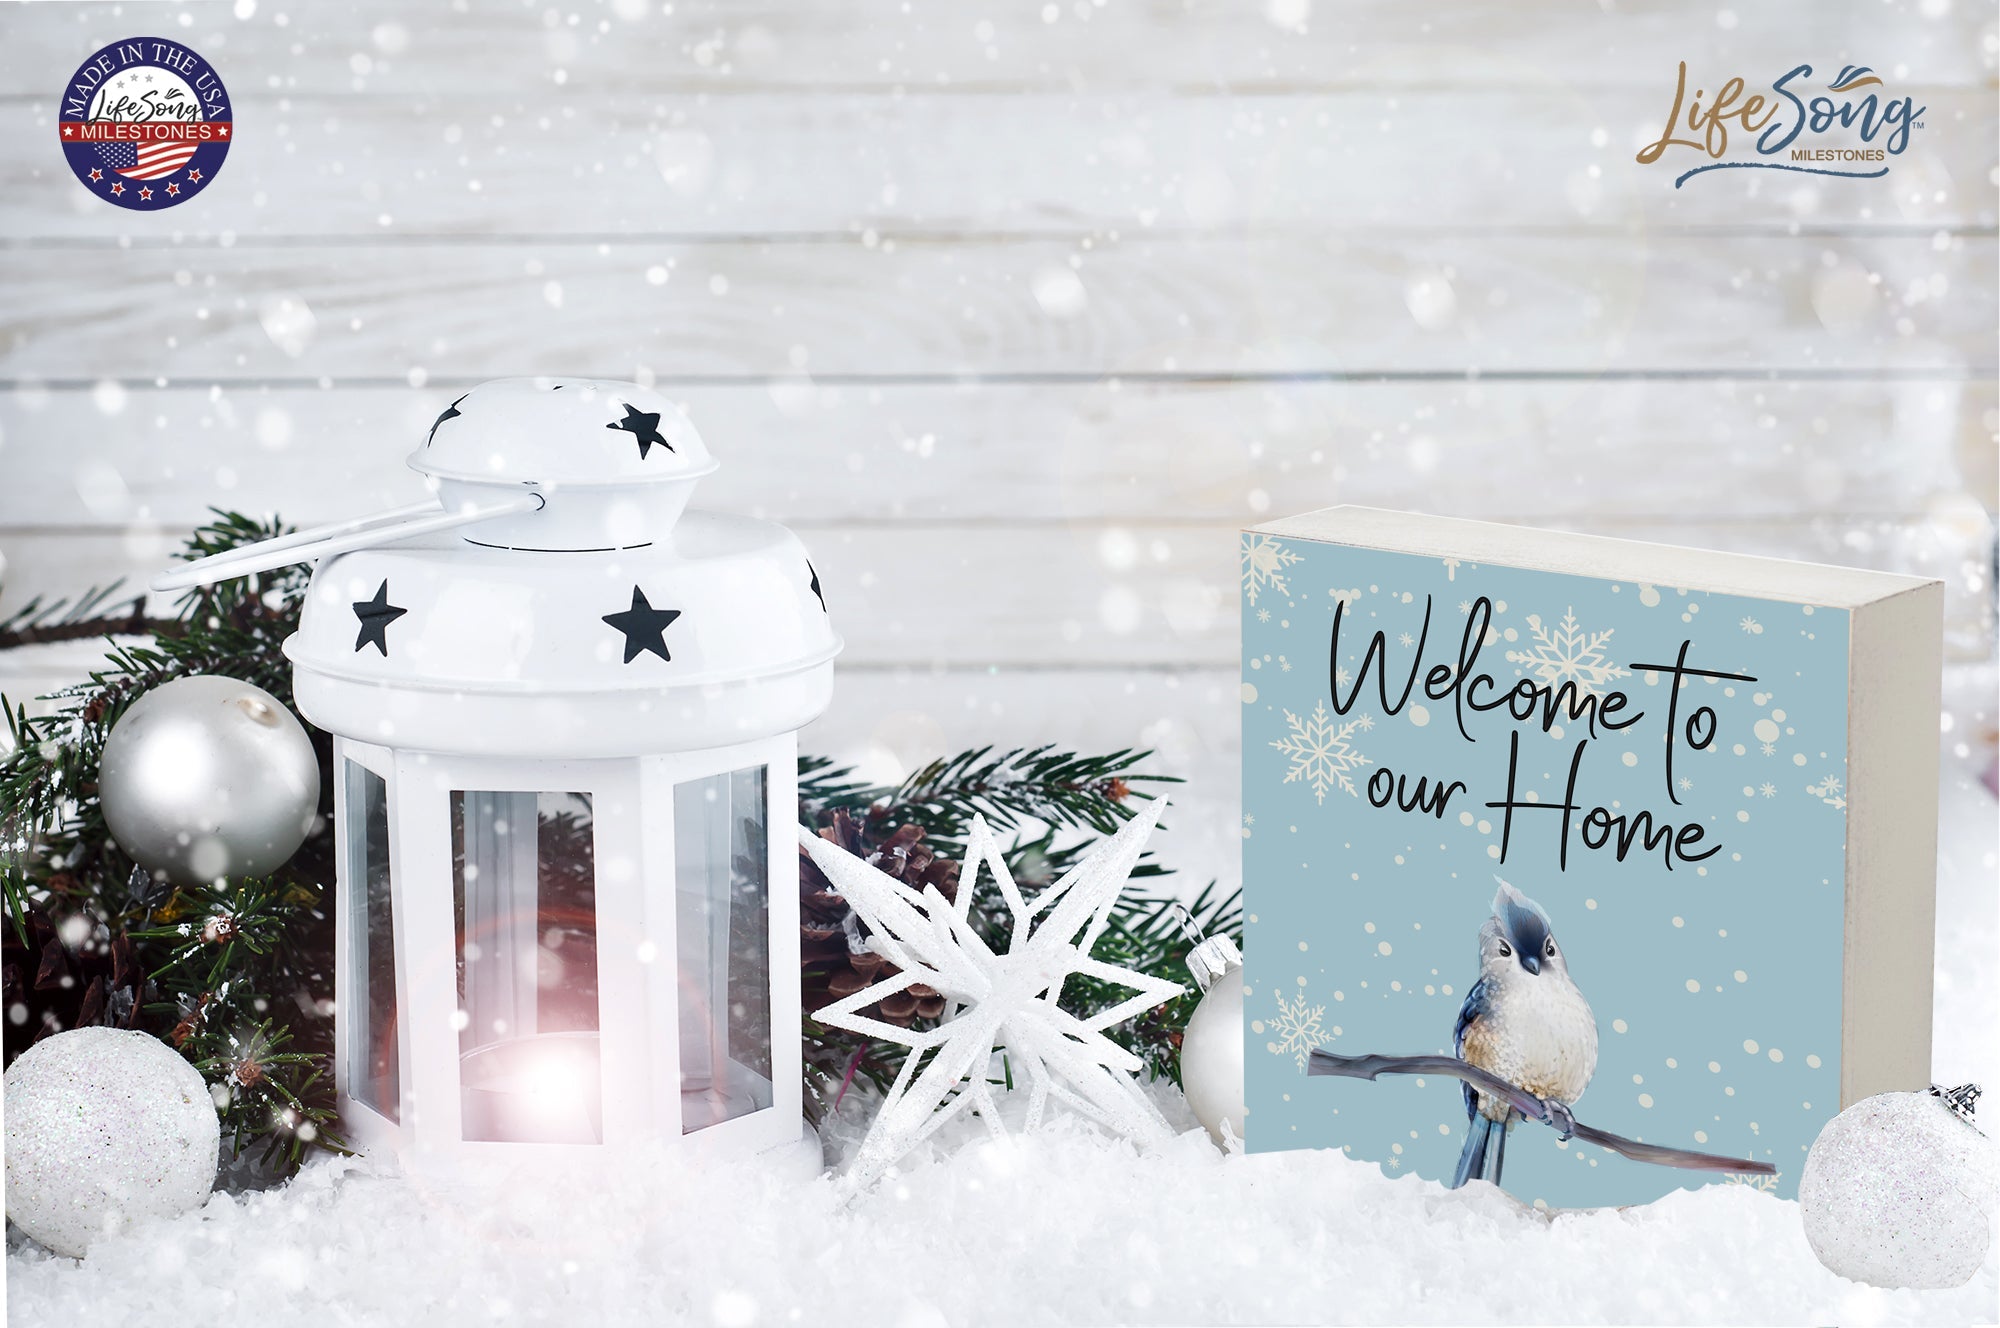 Christmas Shelf Décor - Welcome To Our Home - LifeSong Milestones